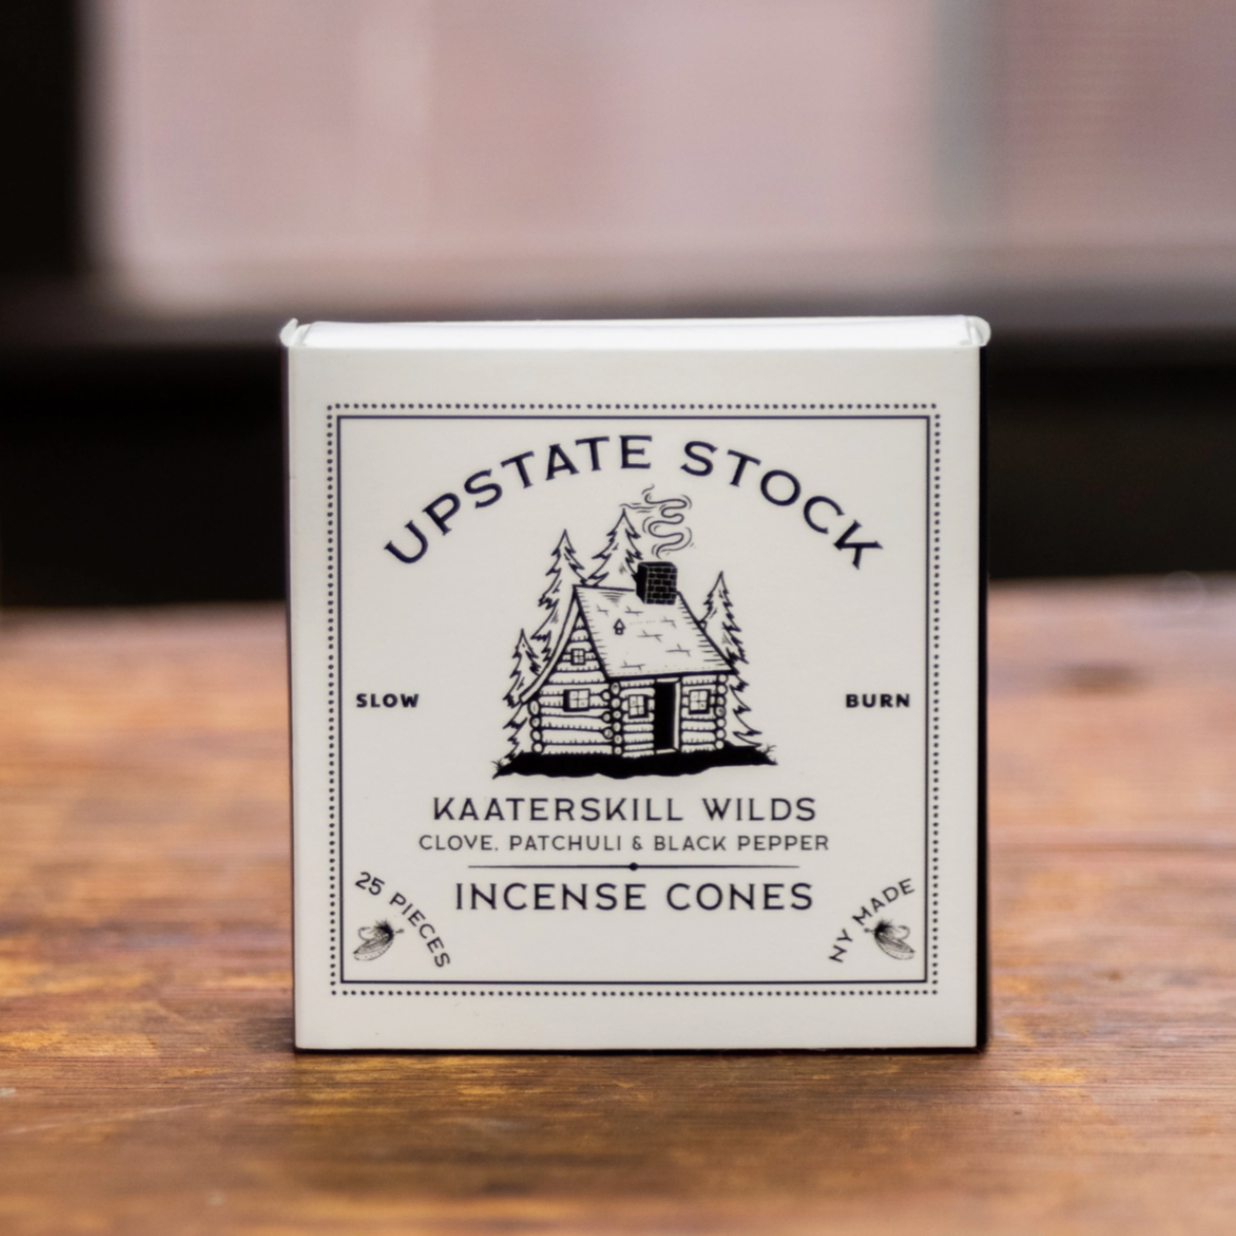 Upstate Stock Kaaterskill Wilds Incense